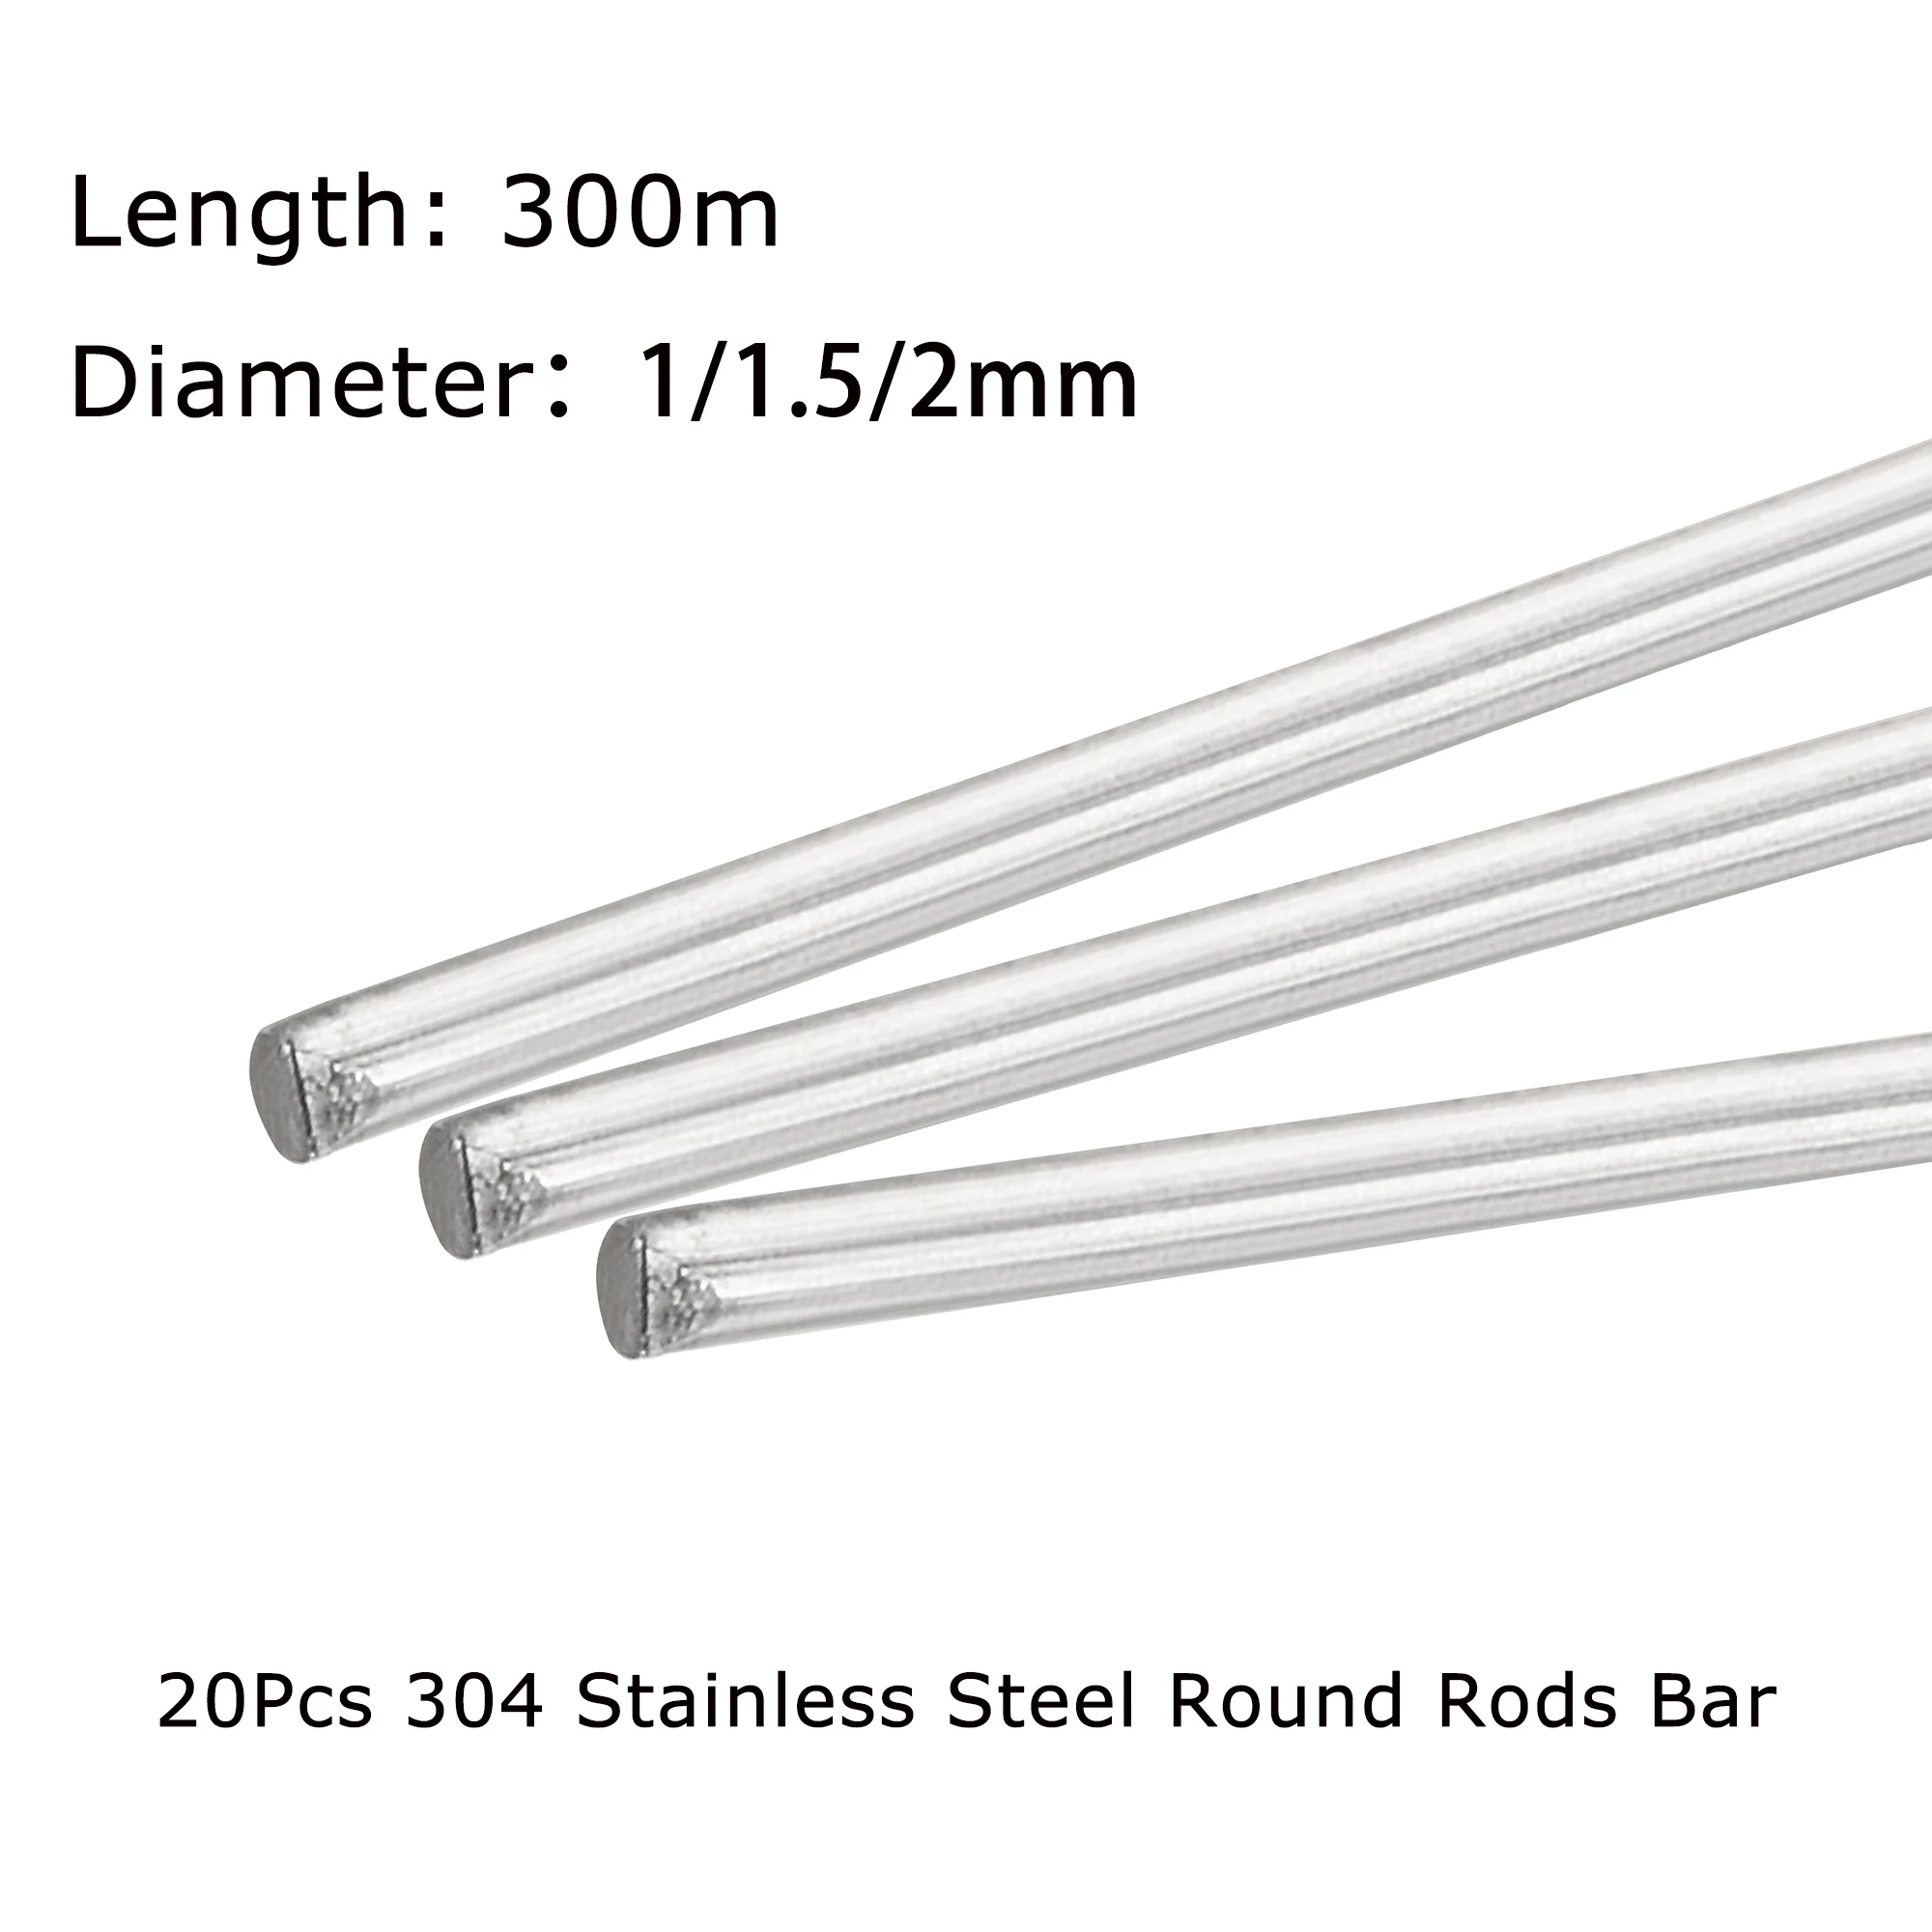 

20Pcs 304 Stainless Steel Rod Bar 1mm 1.5mm 2mm Linear Shaft Metric Round 300mm Long For DIY RC Car RC Helicopter Airplane